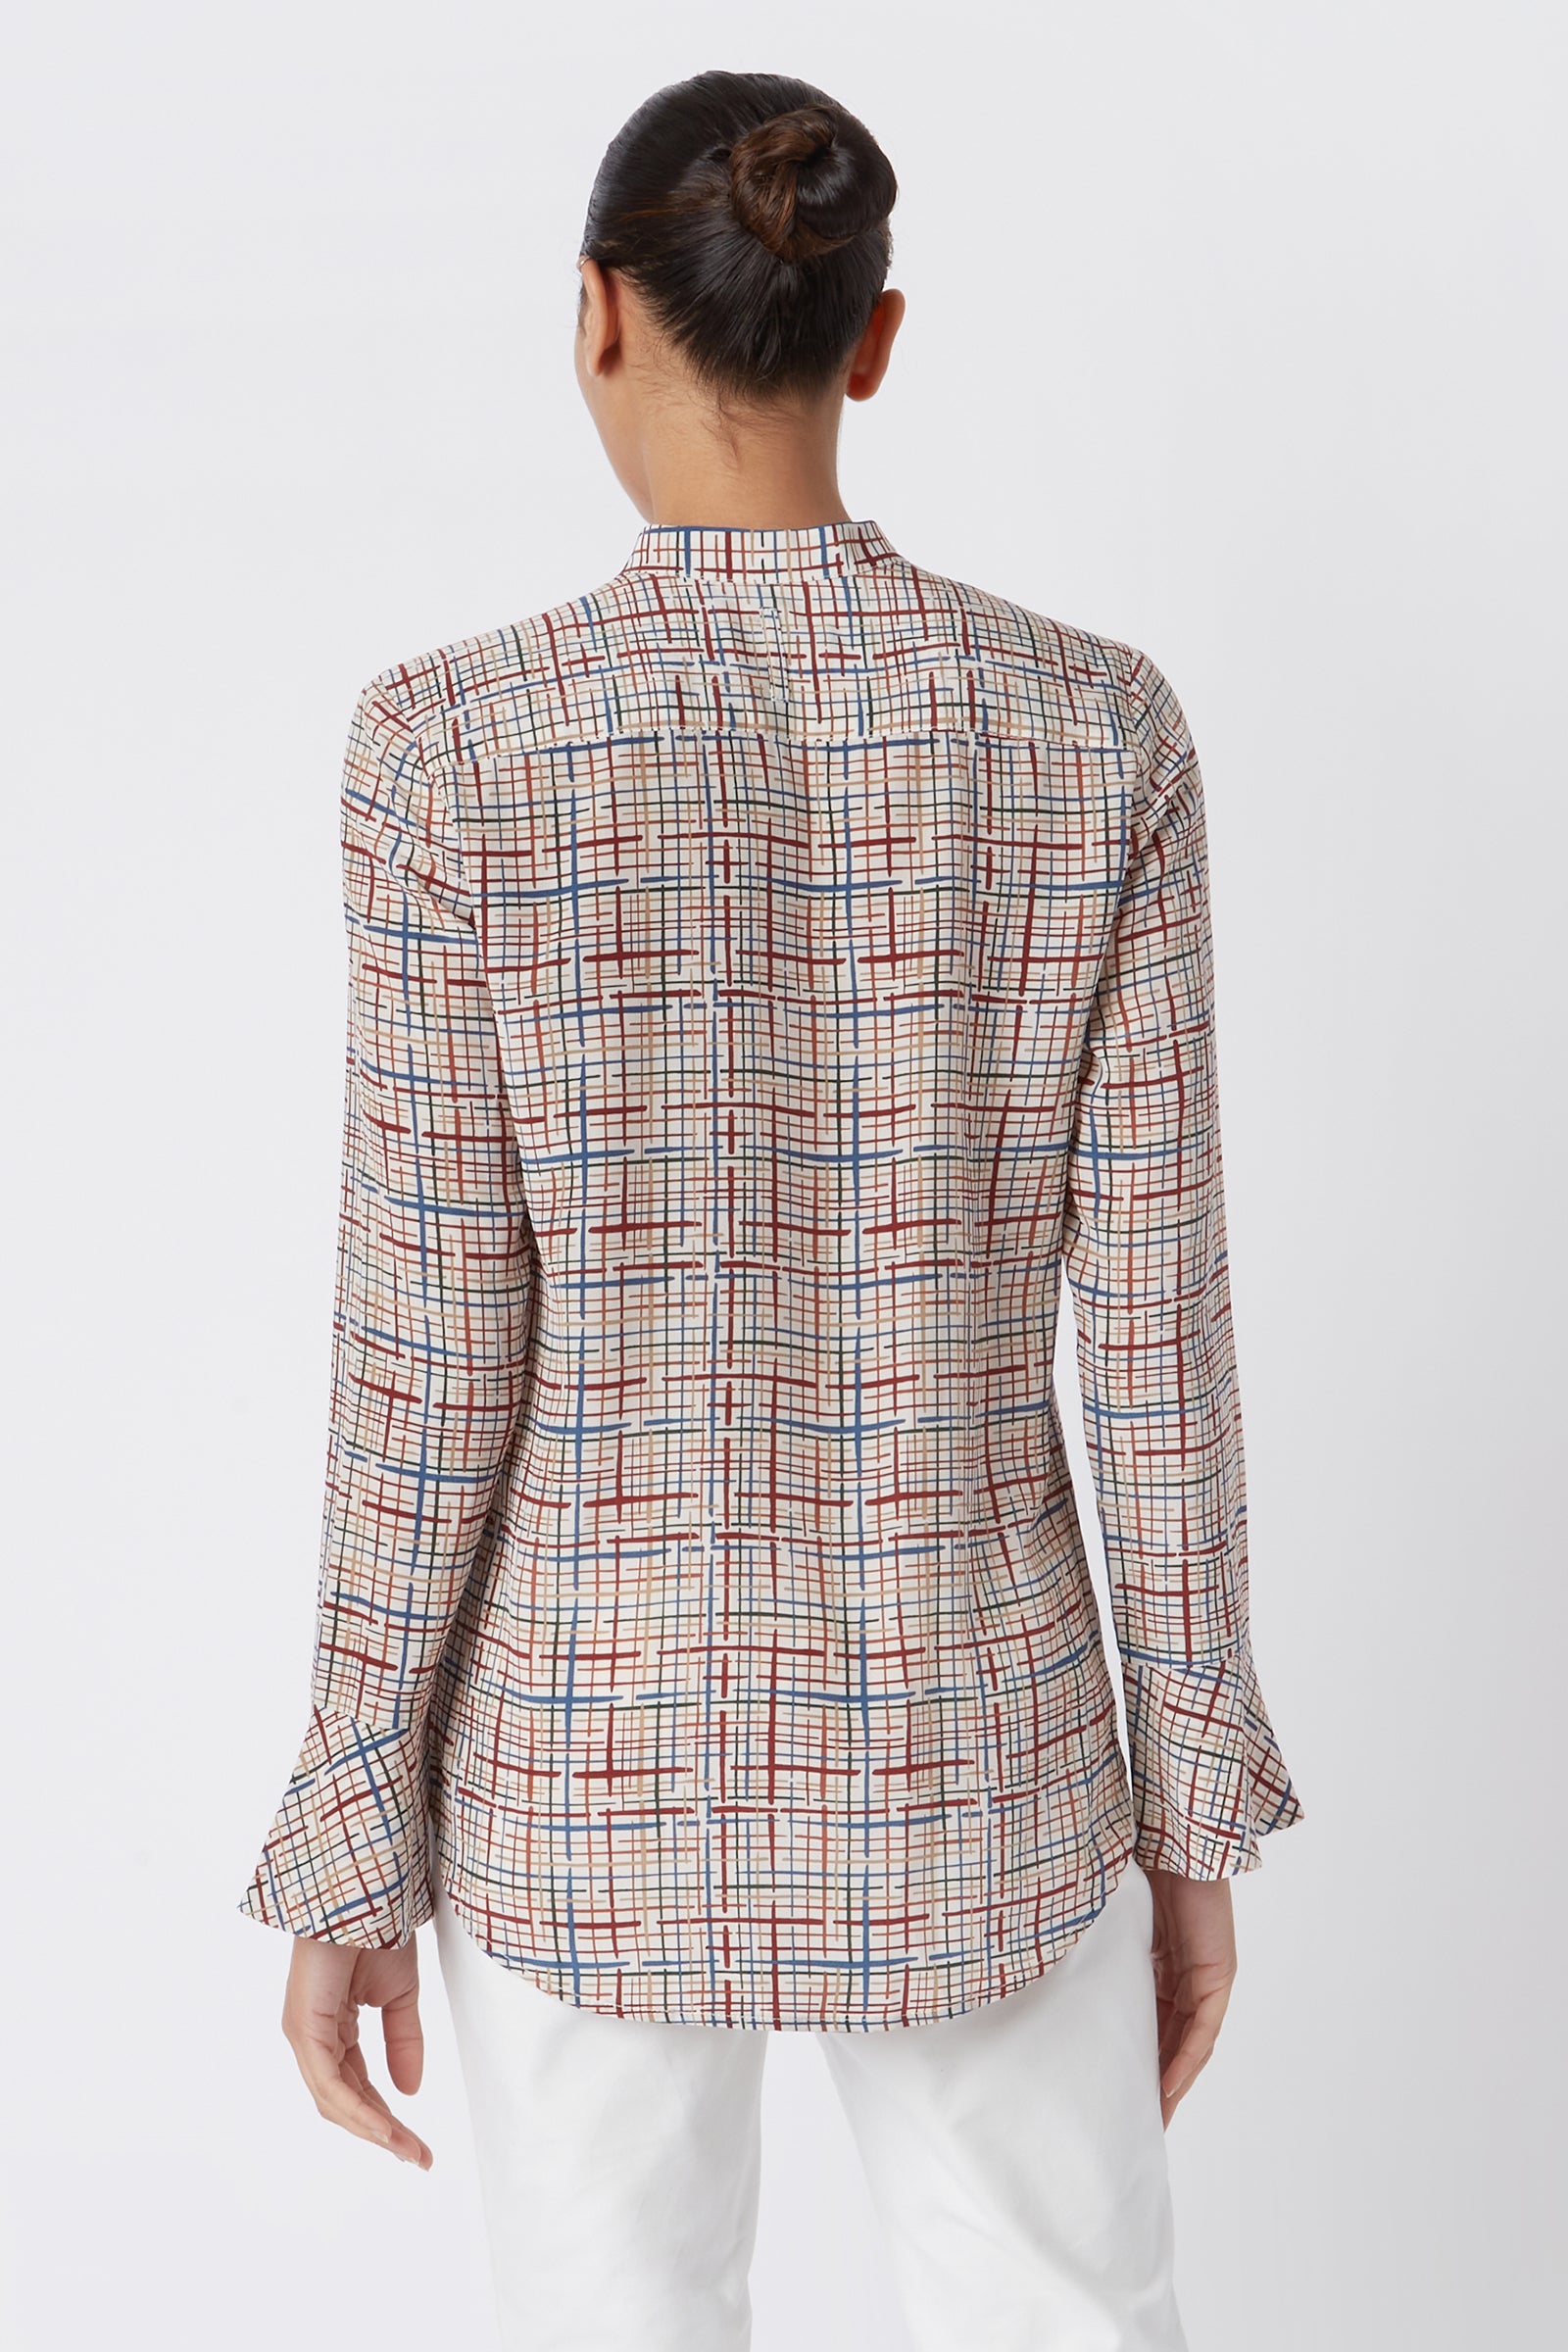 Kal Rieman Juliet Band Collar Blouse in Sketch Plaid on Model Back View